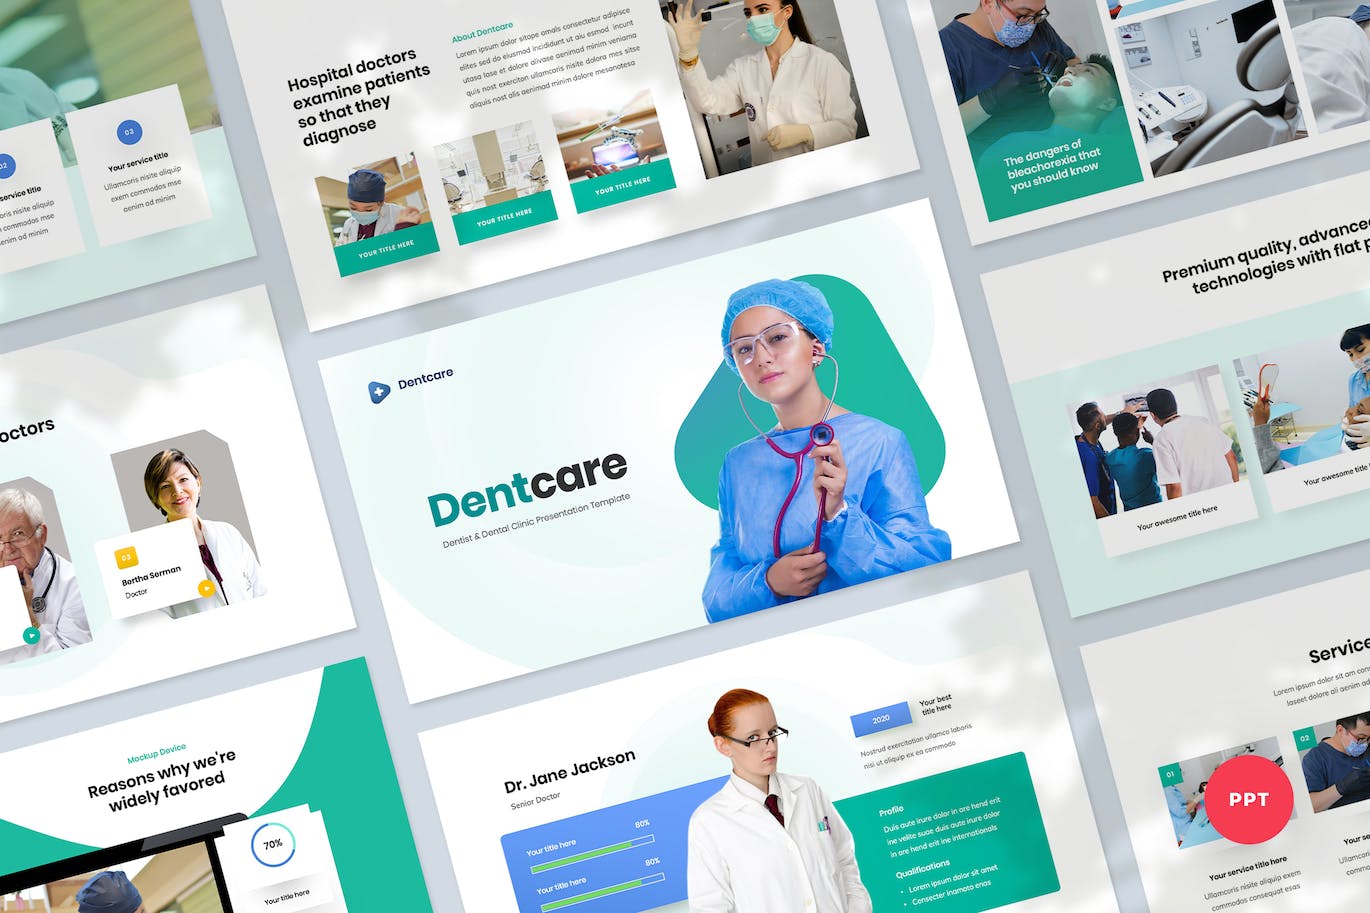 A selection of images of colorful presentation template slides on the topic of dentistry.